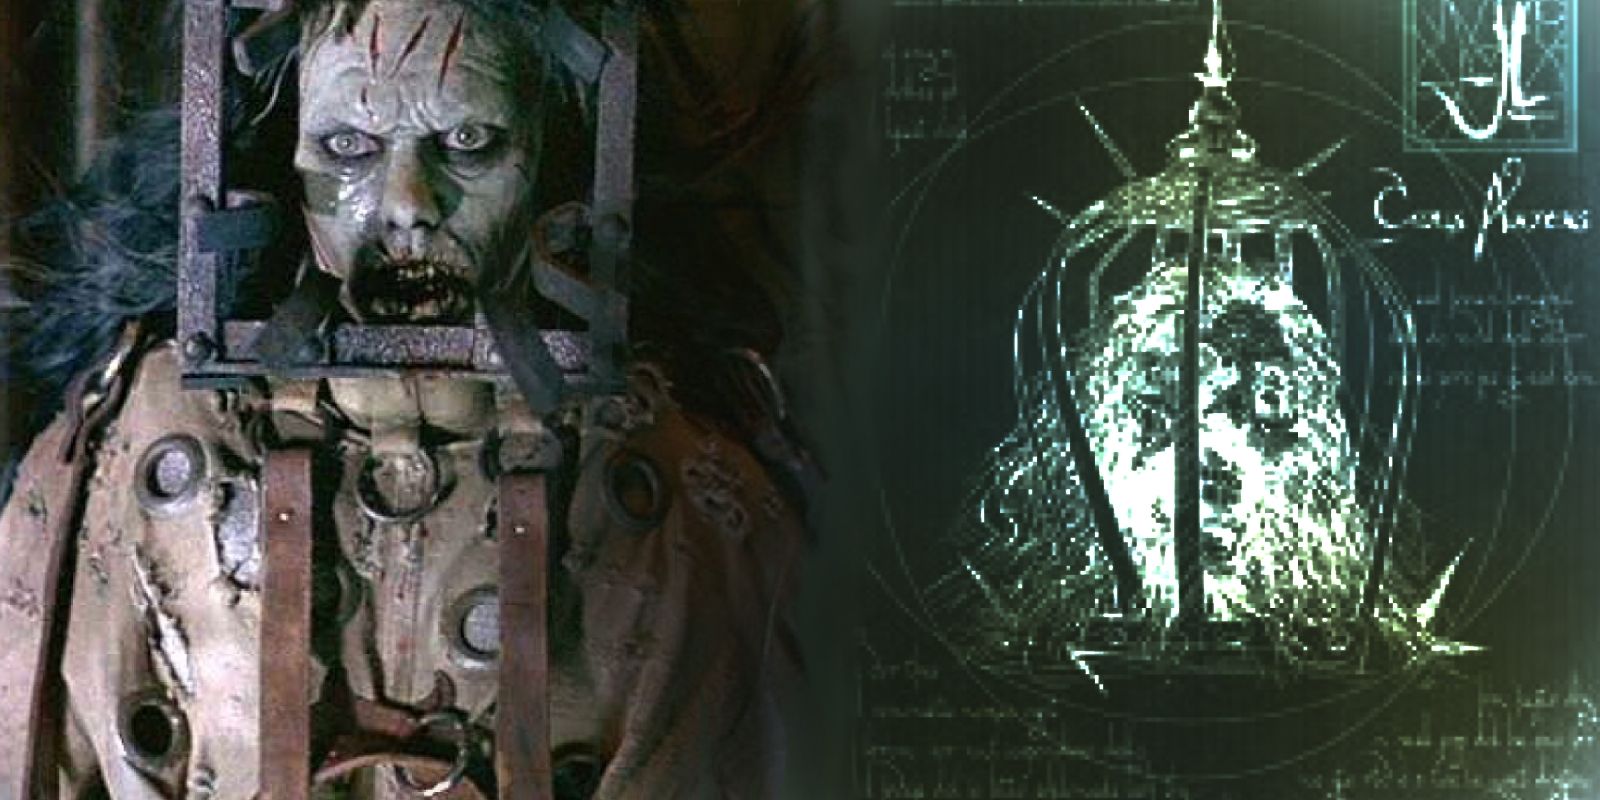 An illustration and actual still of The Jackal in Thirteen Ghosts